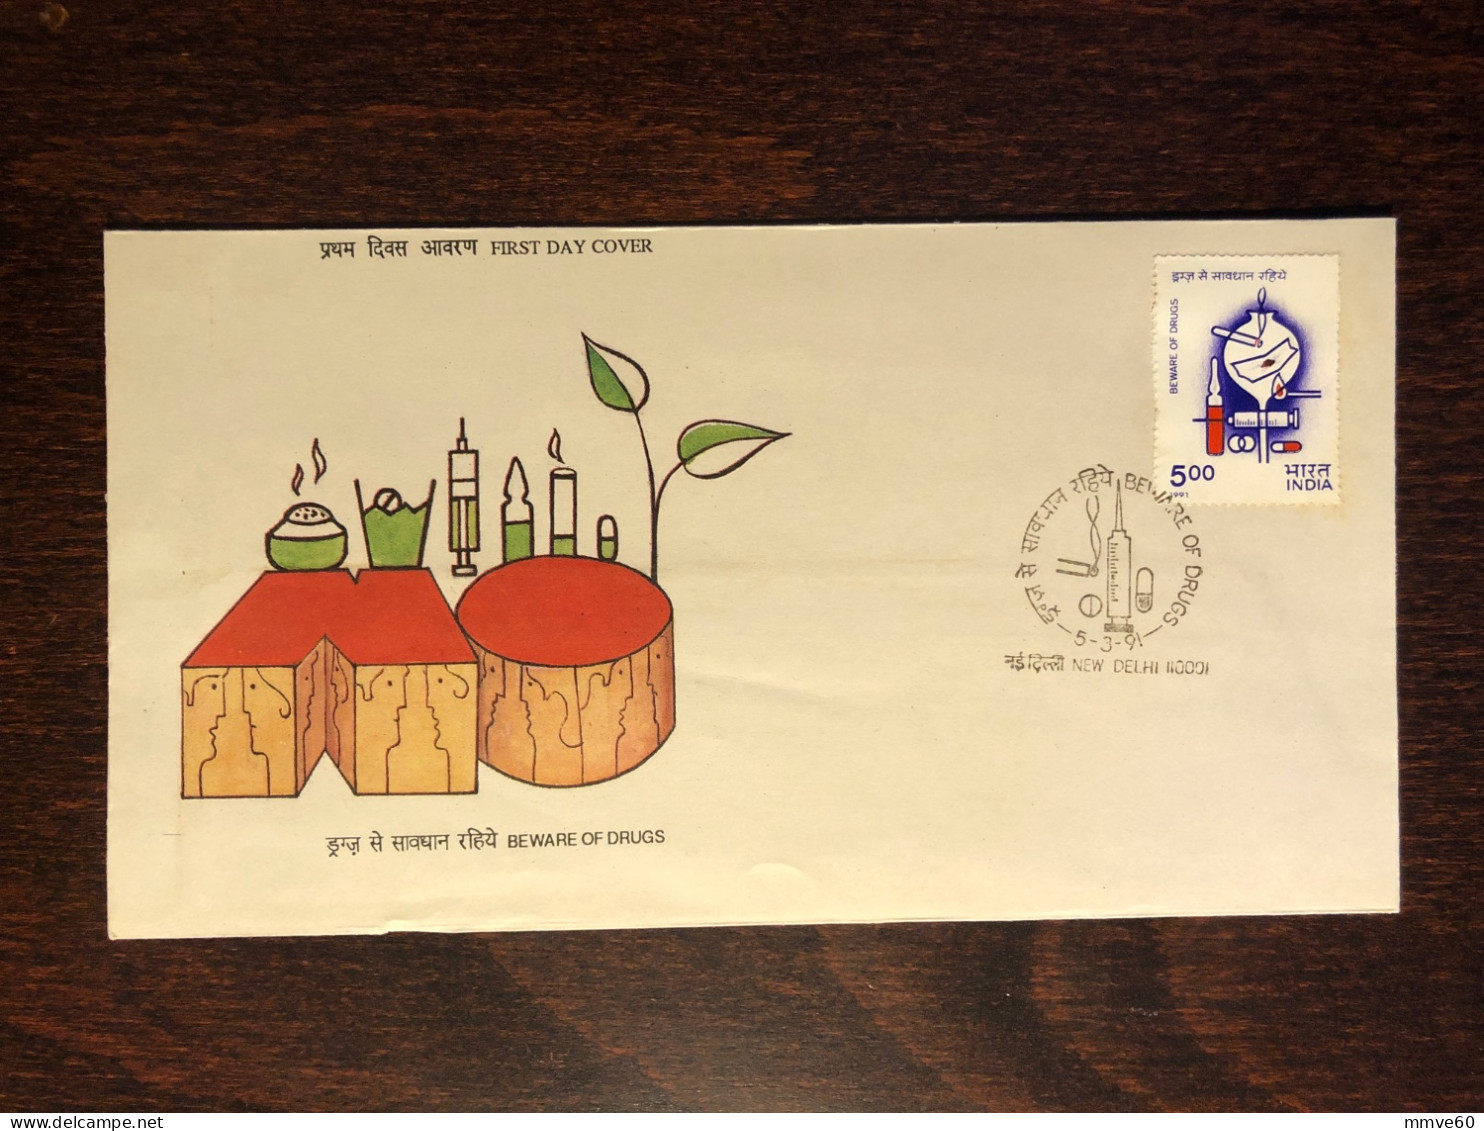 INDIA  FDC COVER 1991 YEAR NARCOTICS DRUGS HEALTH MEDICINE STAMPS - Covers & Documents